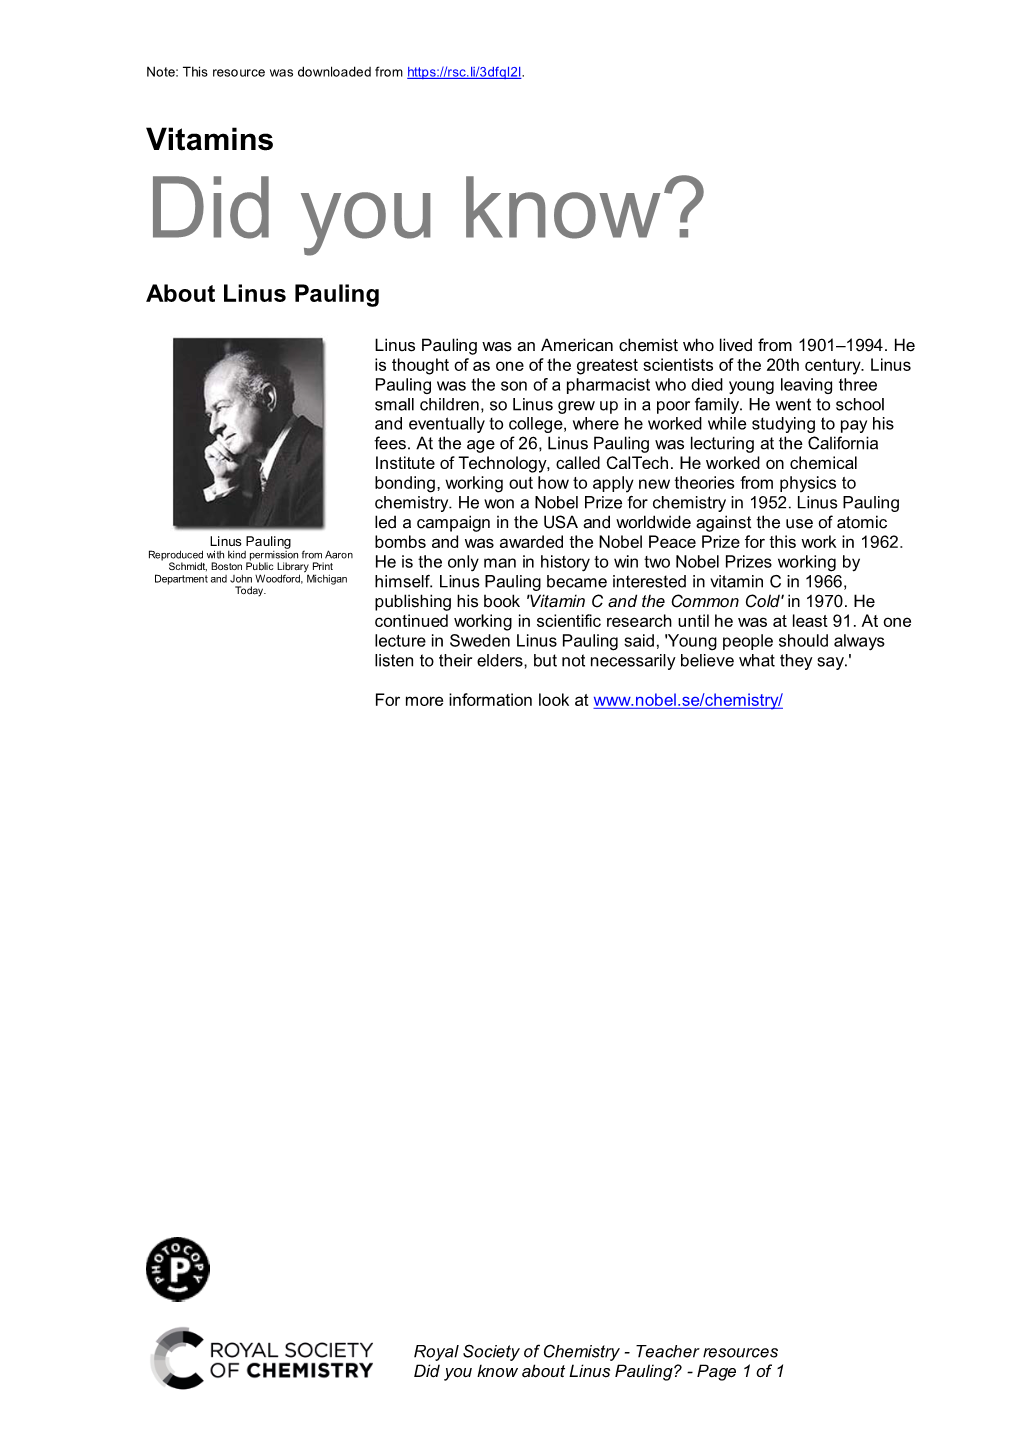 Did You Know About Linus Pauling? Handout